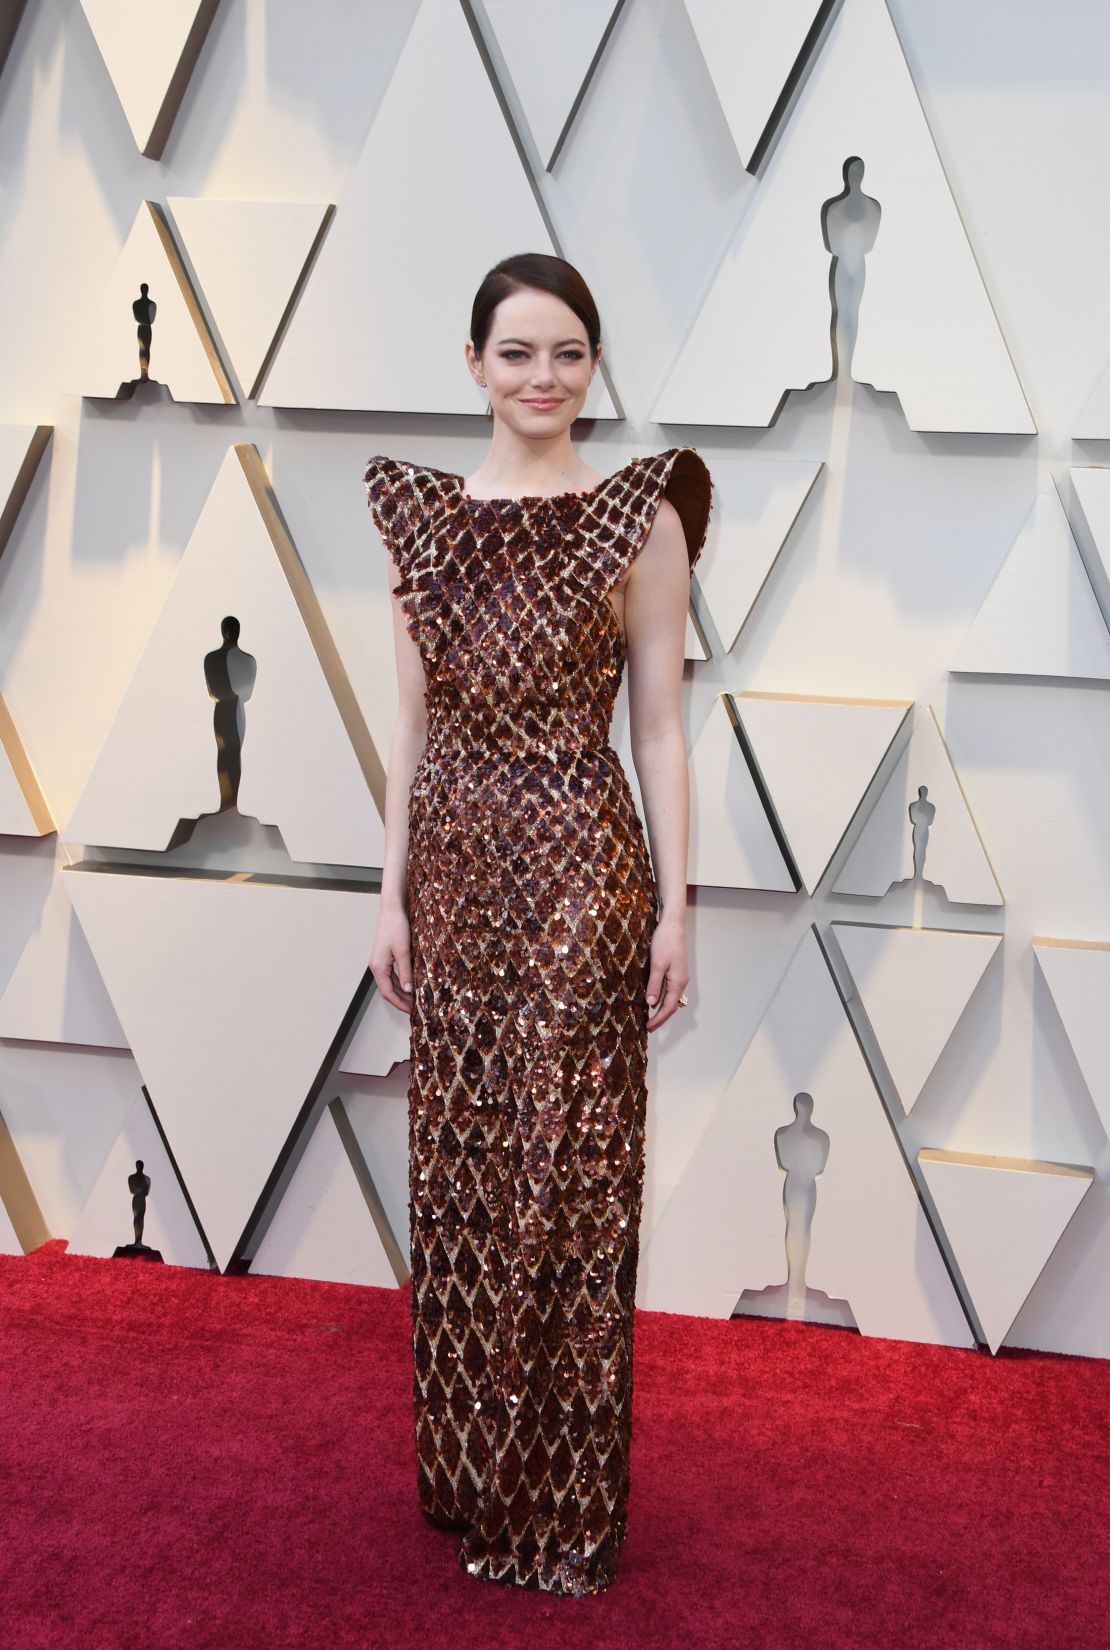 Emma Stone Arrives in the Shiniest Louis Vuitton Jumpsuit to the